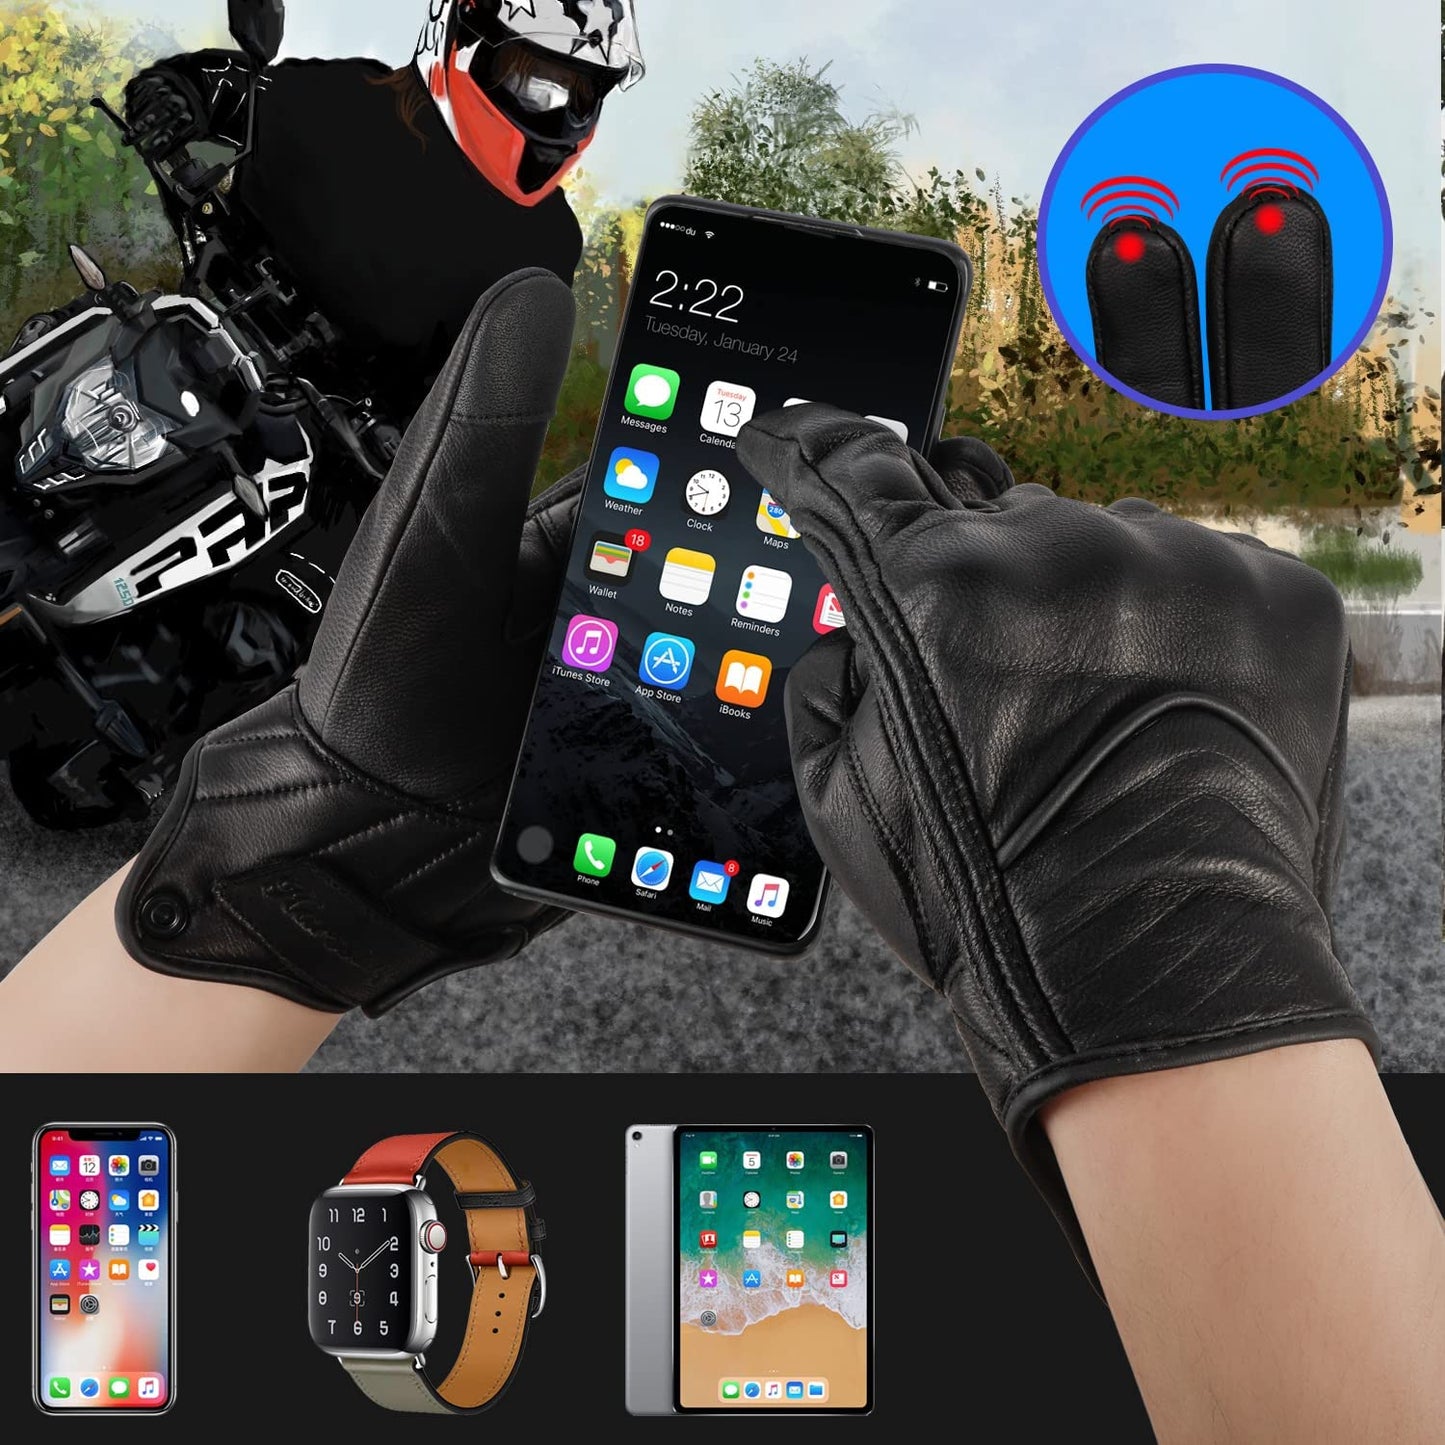 Exclusivo Mezcla Leather Motorcycle Gloves for Men,Riding Driving Biker Racing Motorbike Glove Touchscreen with Hard Knuckle Protection